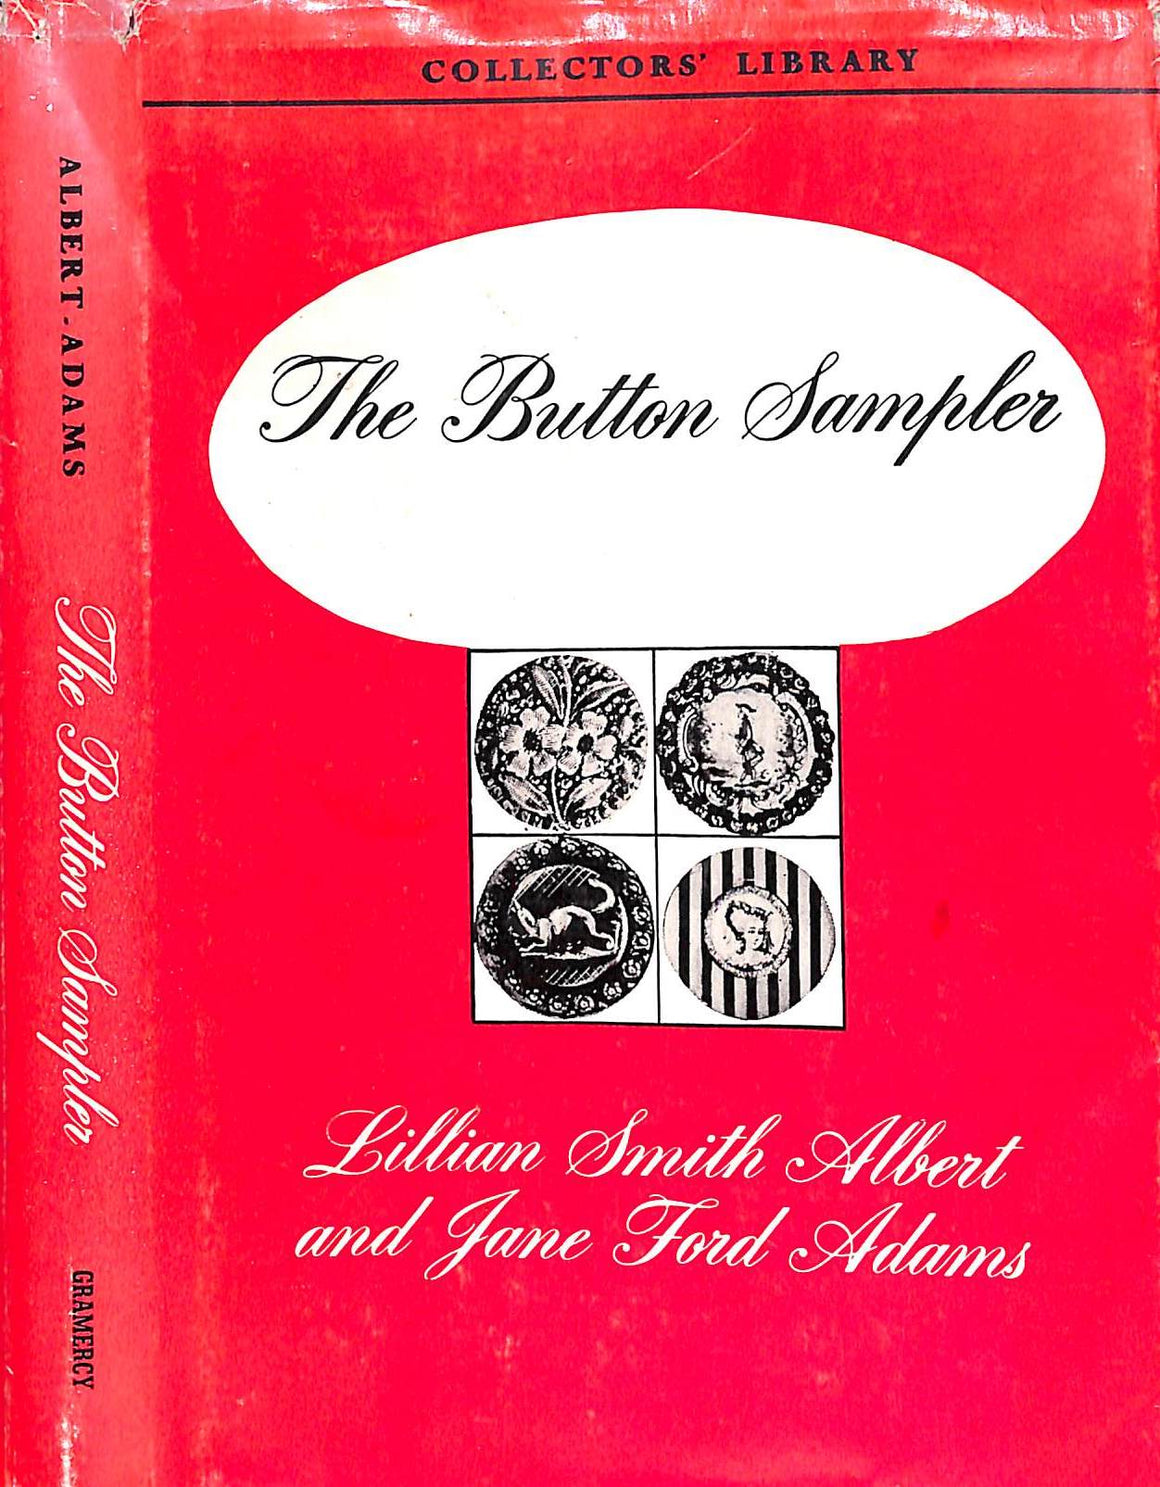 "The Button Sampler" 1951 ALBERT, Lillian Smith and ADAMS, Jane Ford